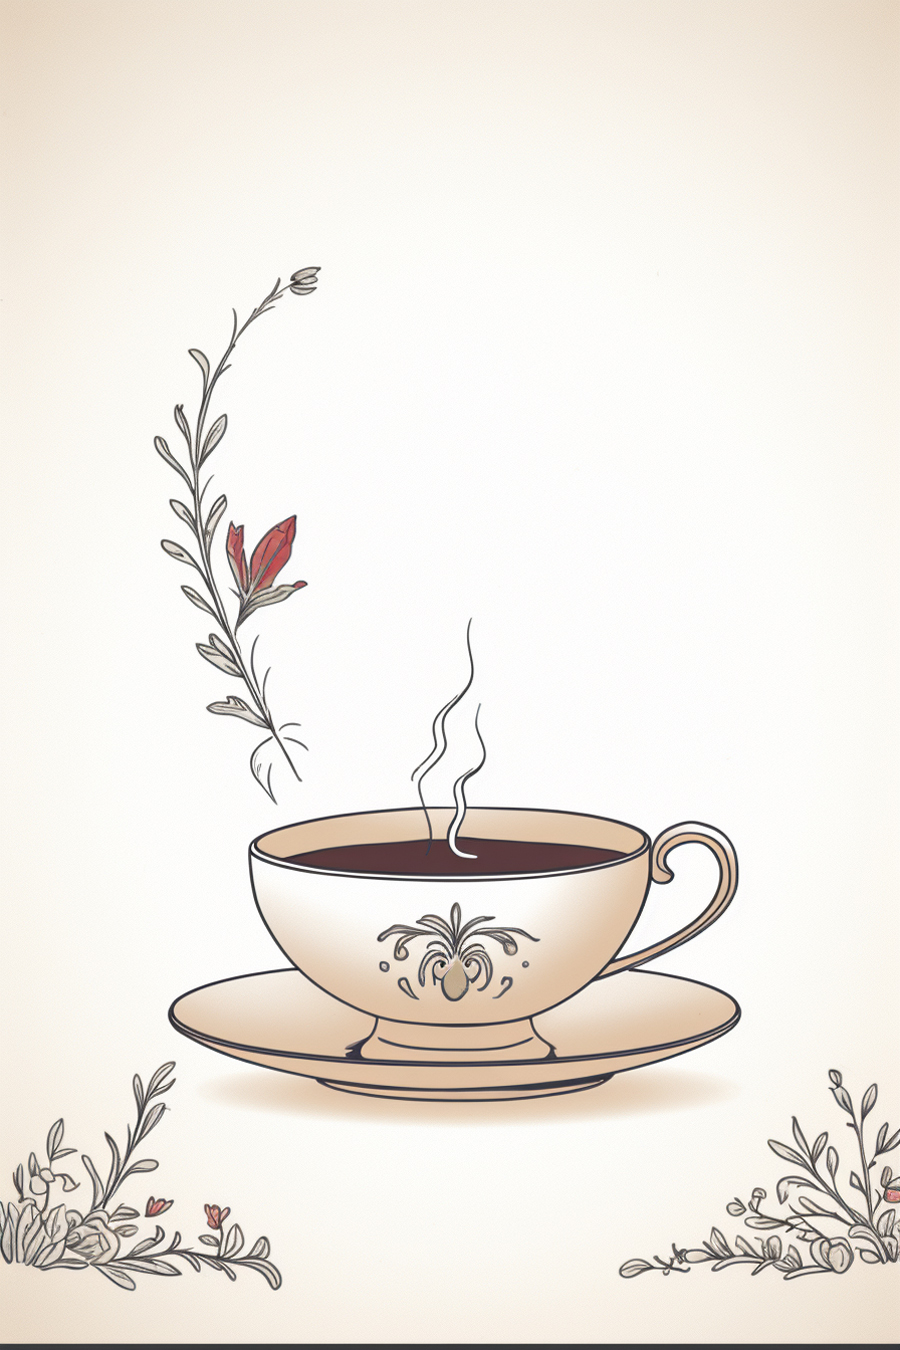 A cup of coffee with flowers vector | price 1 credit usd $1.